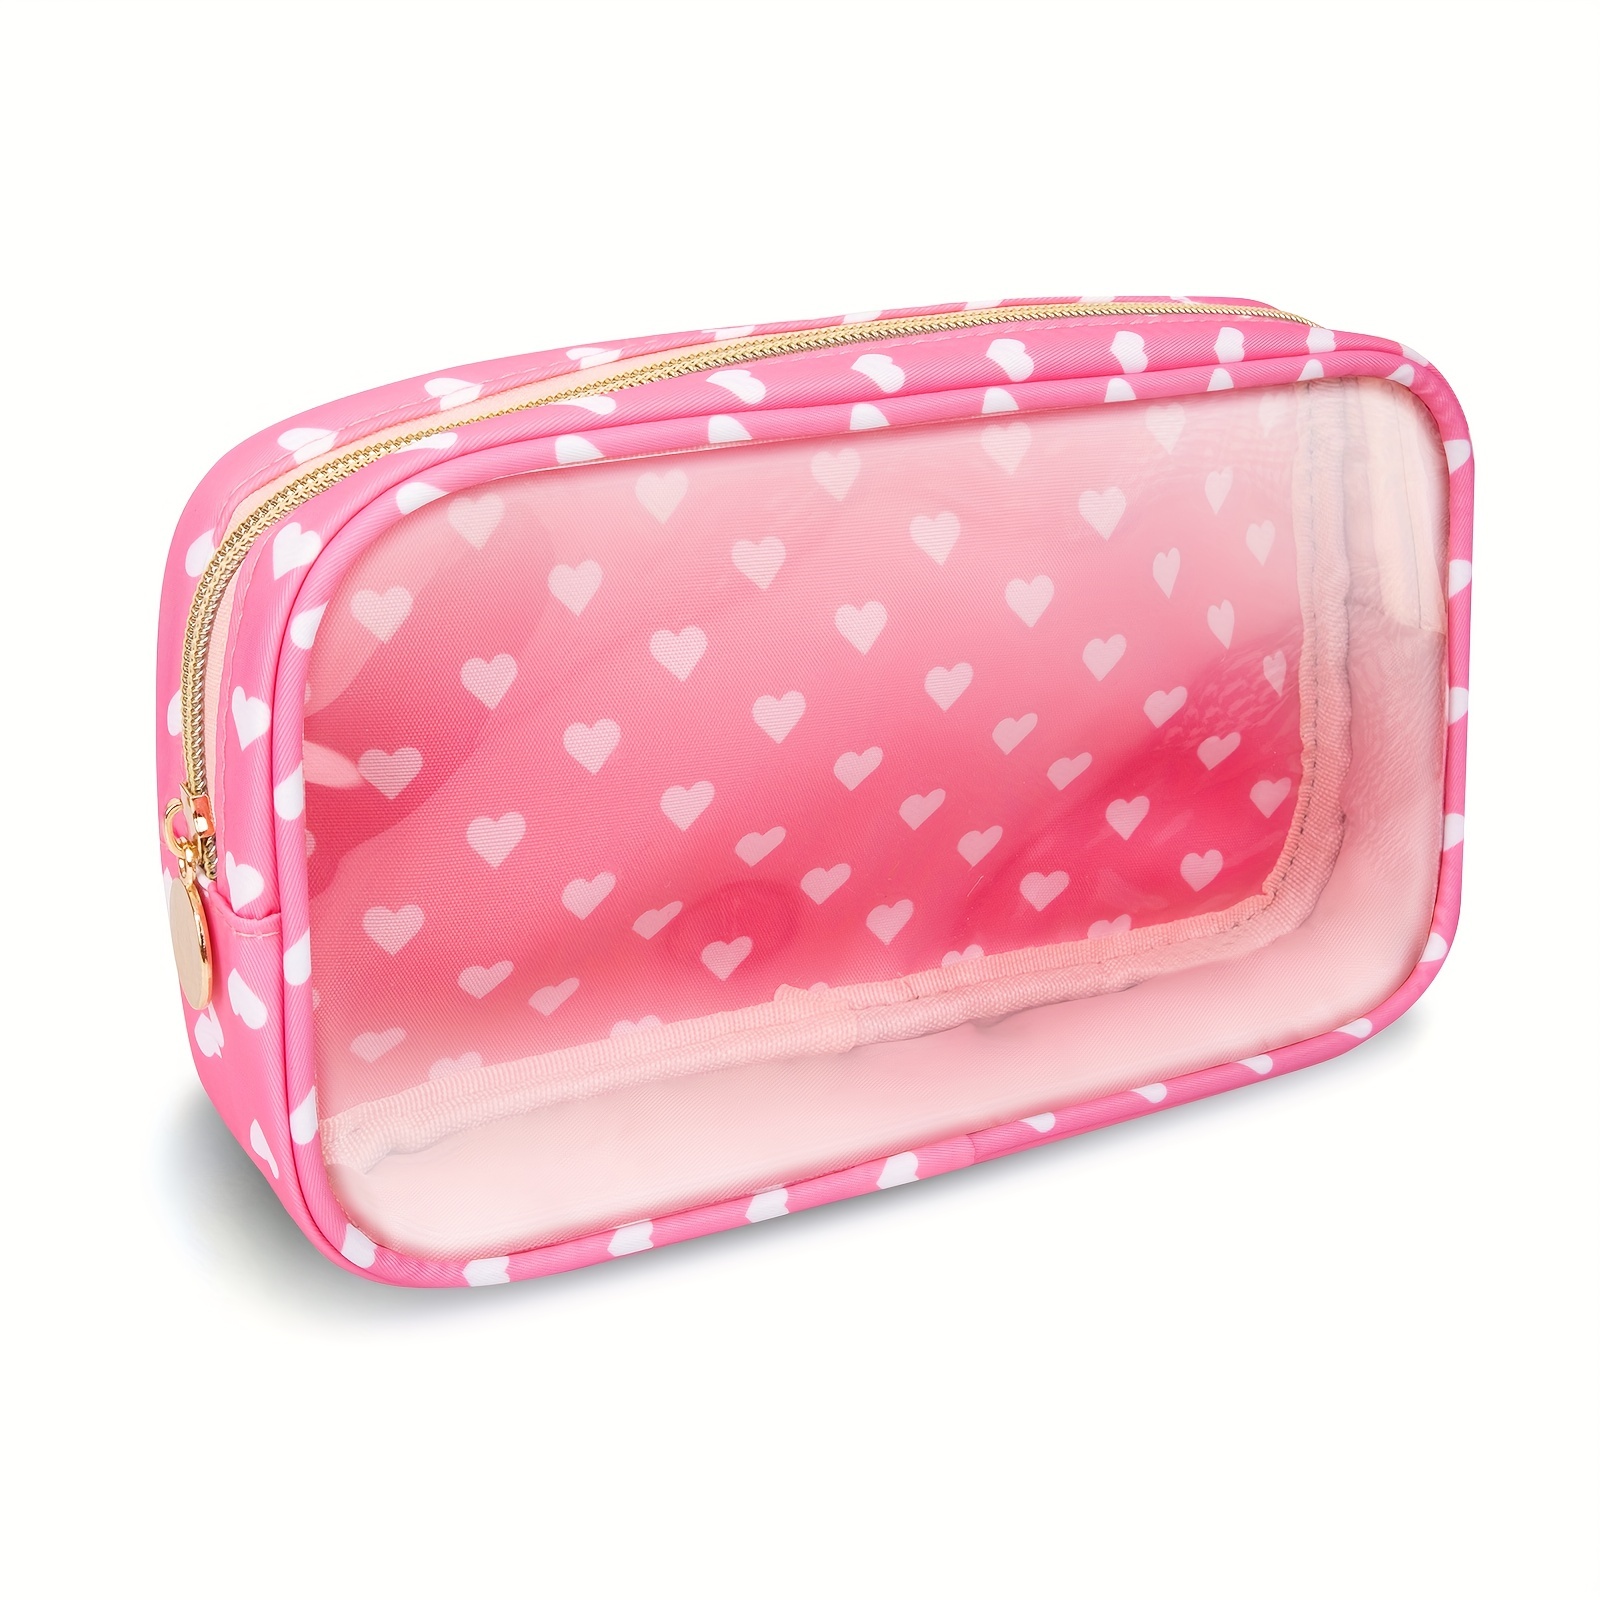 Colorful Candy Clear Pencil Bags Transparent Plastic Pen Case Box Cosmetic  Makeup Zipper Bag Pouch School Office Supply Bags : Non-Brand